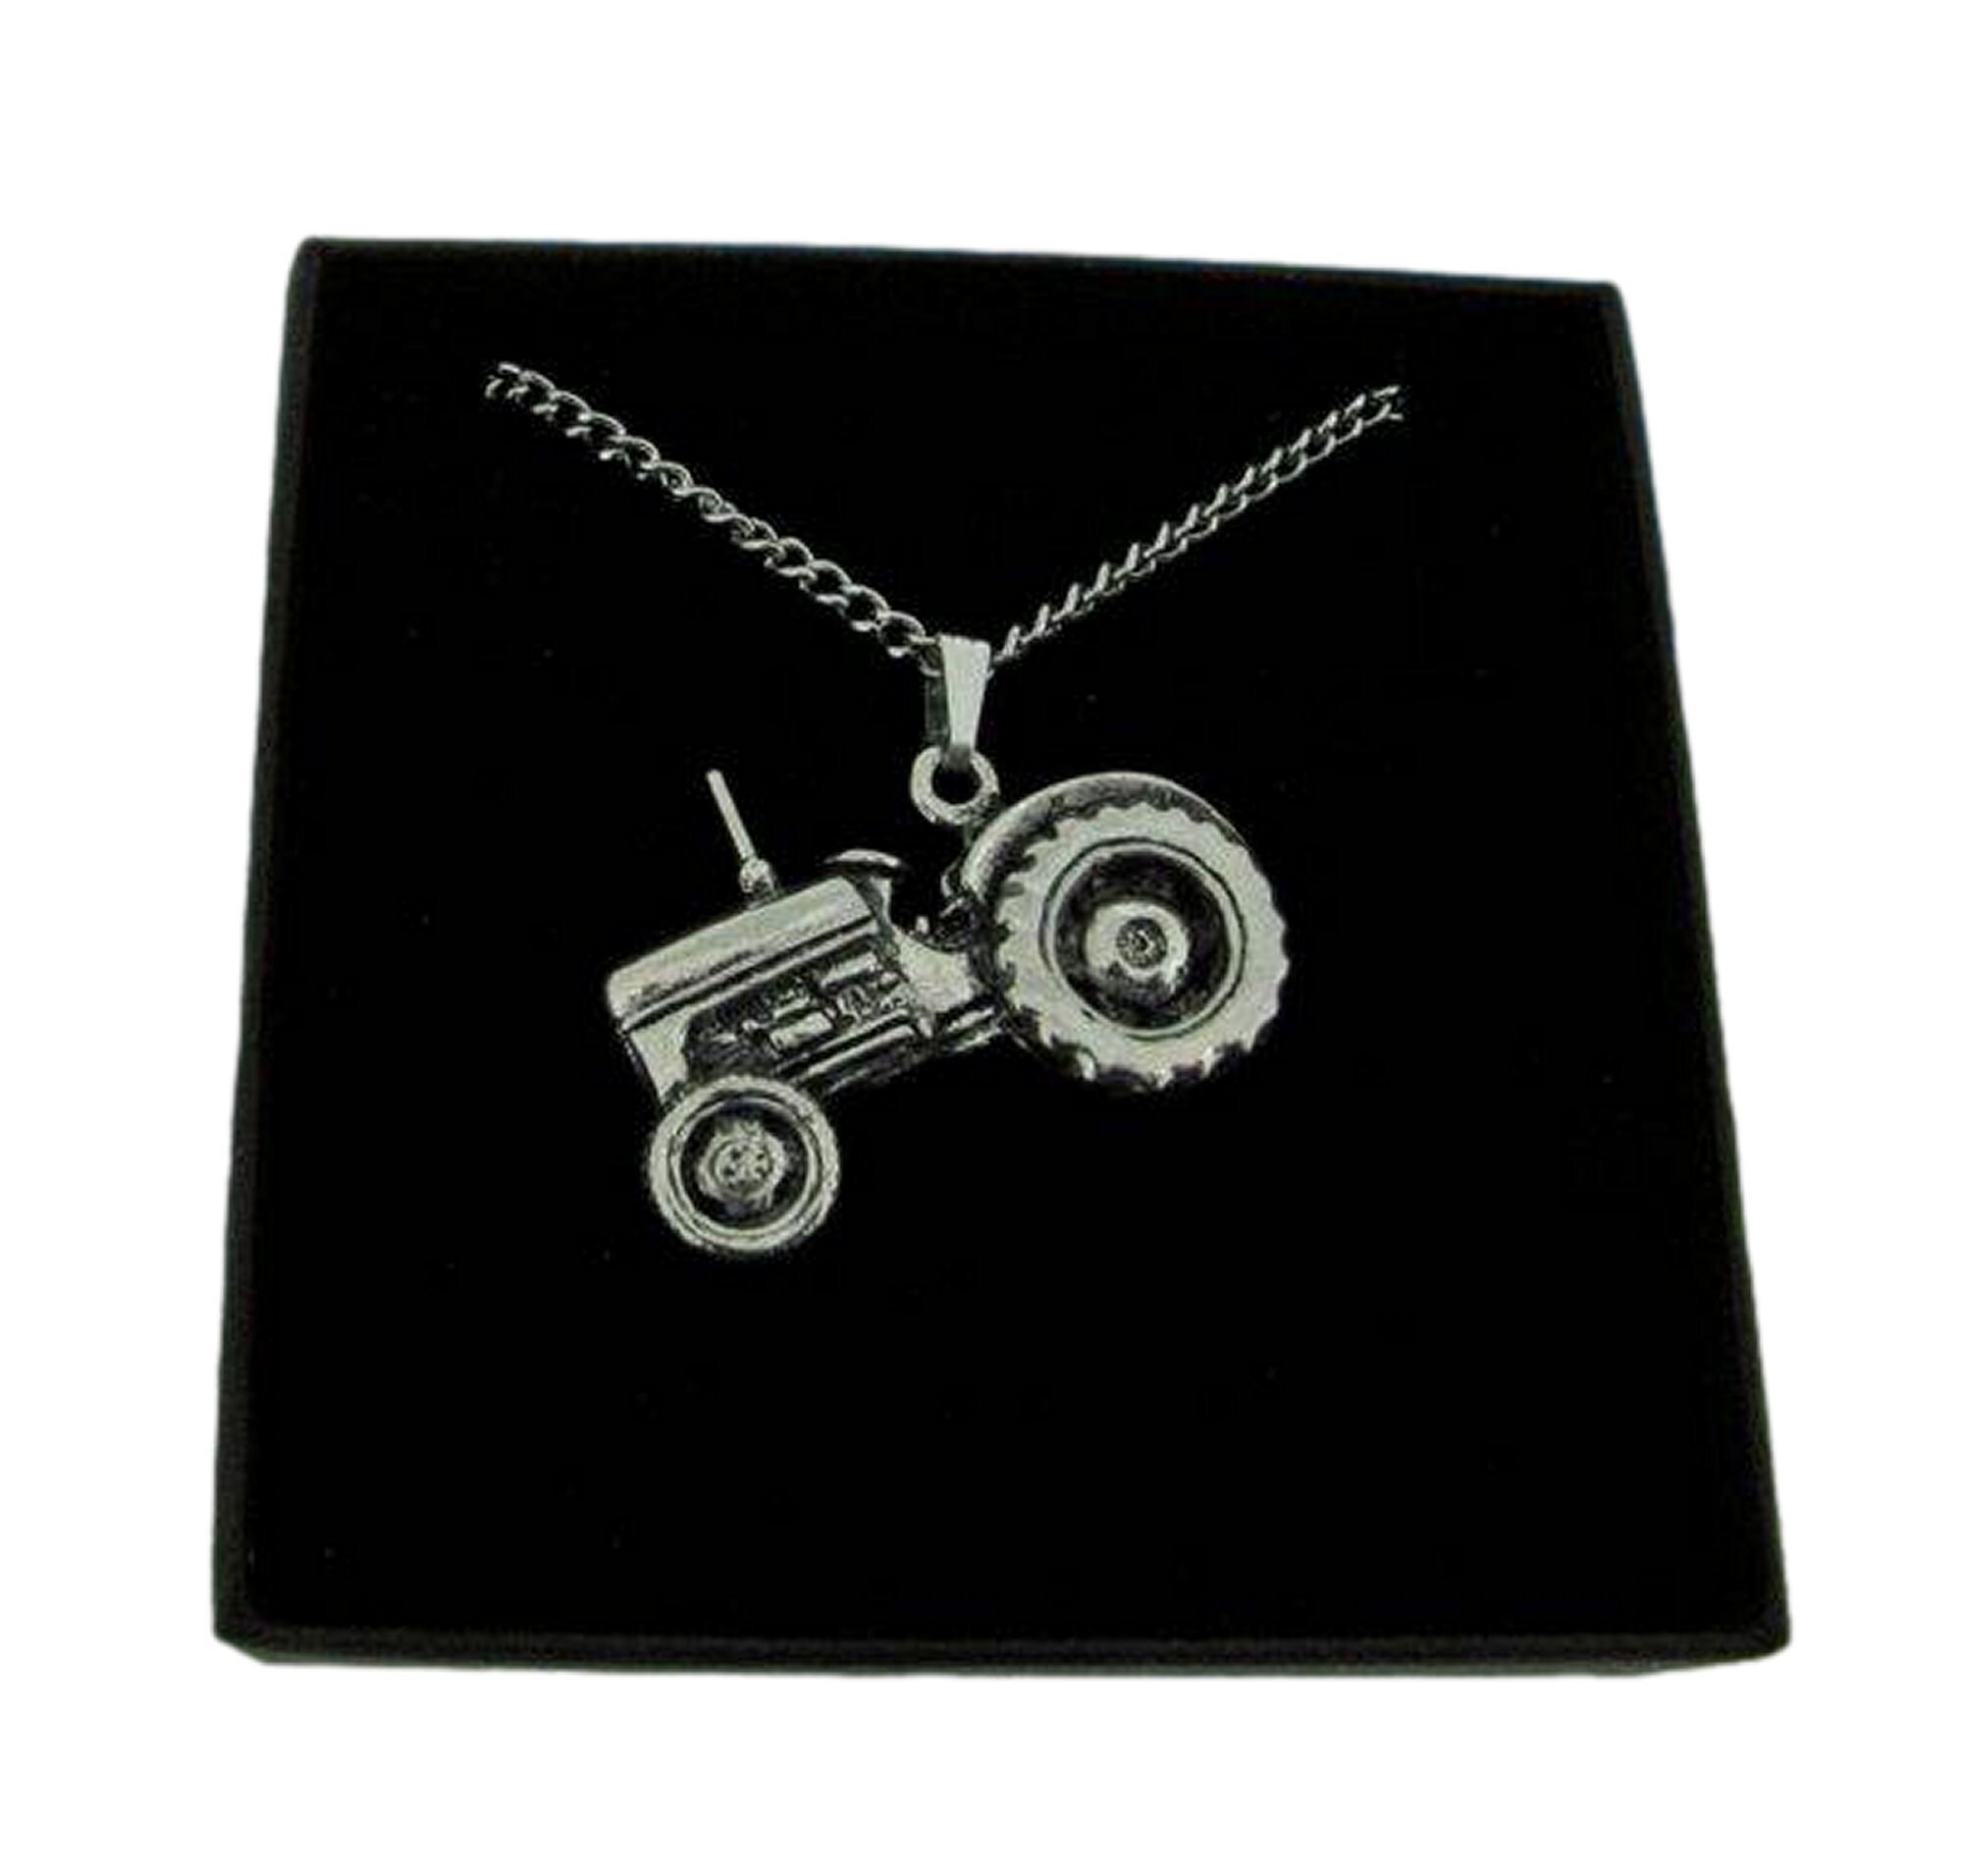 Tractor R181 English Pewter Emblem on a Black Cord Necklace Handmade